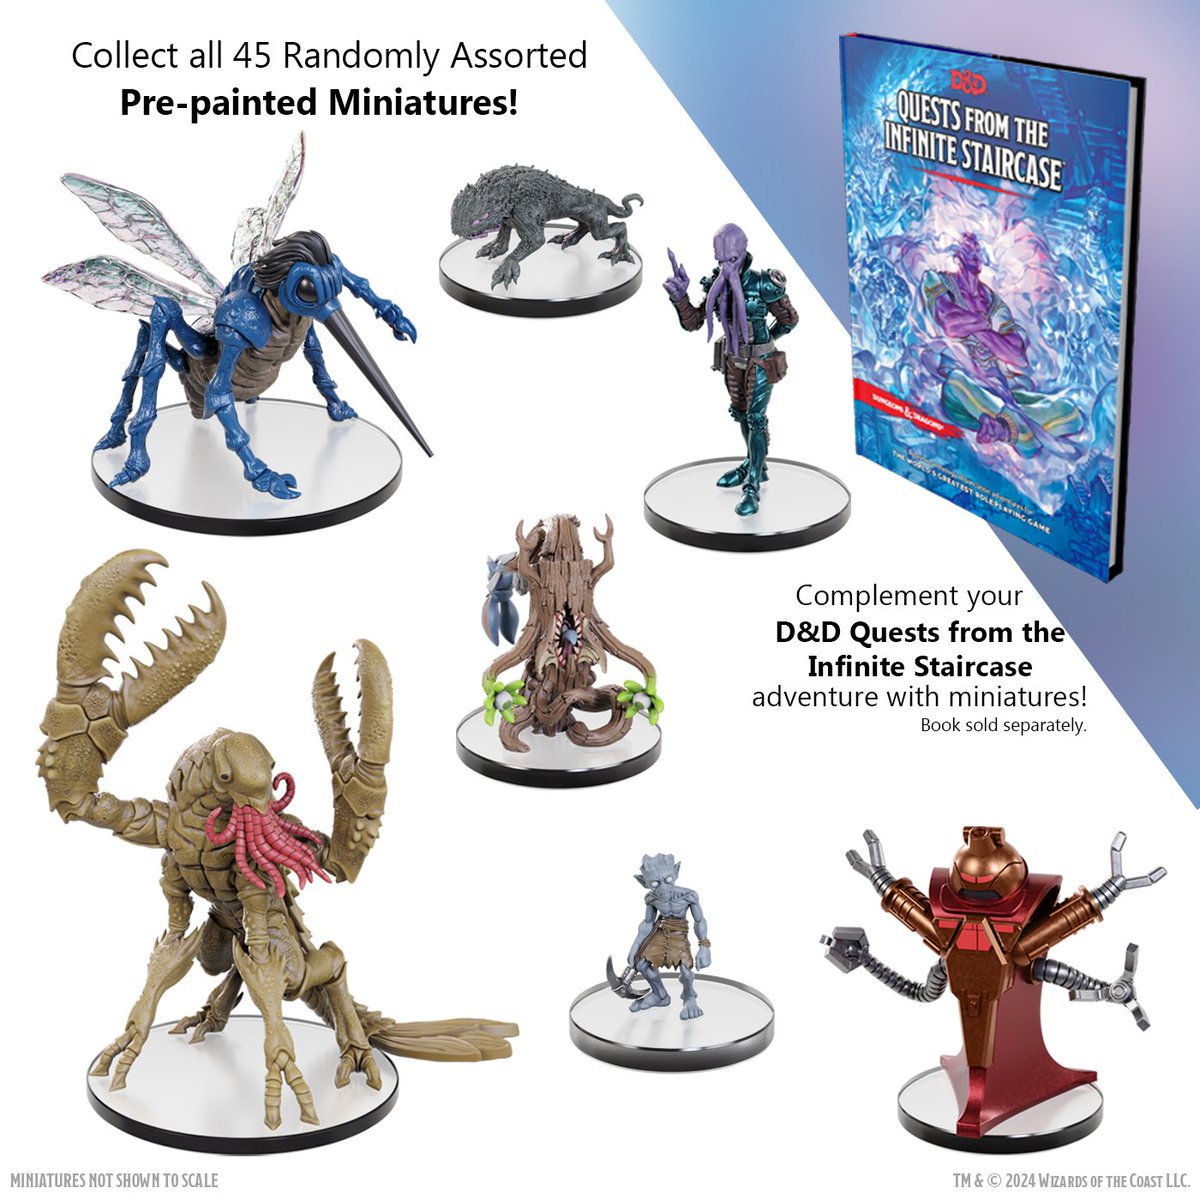 Check out some of the minis from our upcoming Quests from the Infinite Staircase collection! 🧞‍♂️ Pre-order boosters and boxed minis from the campaign at your local game store or wizkids.io/QFTIS